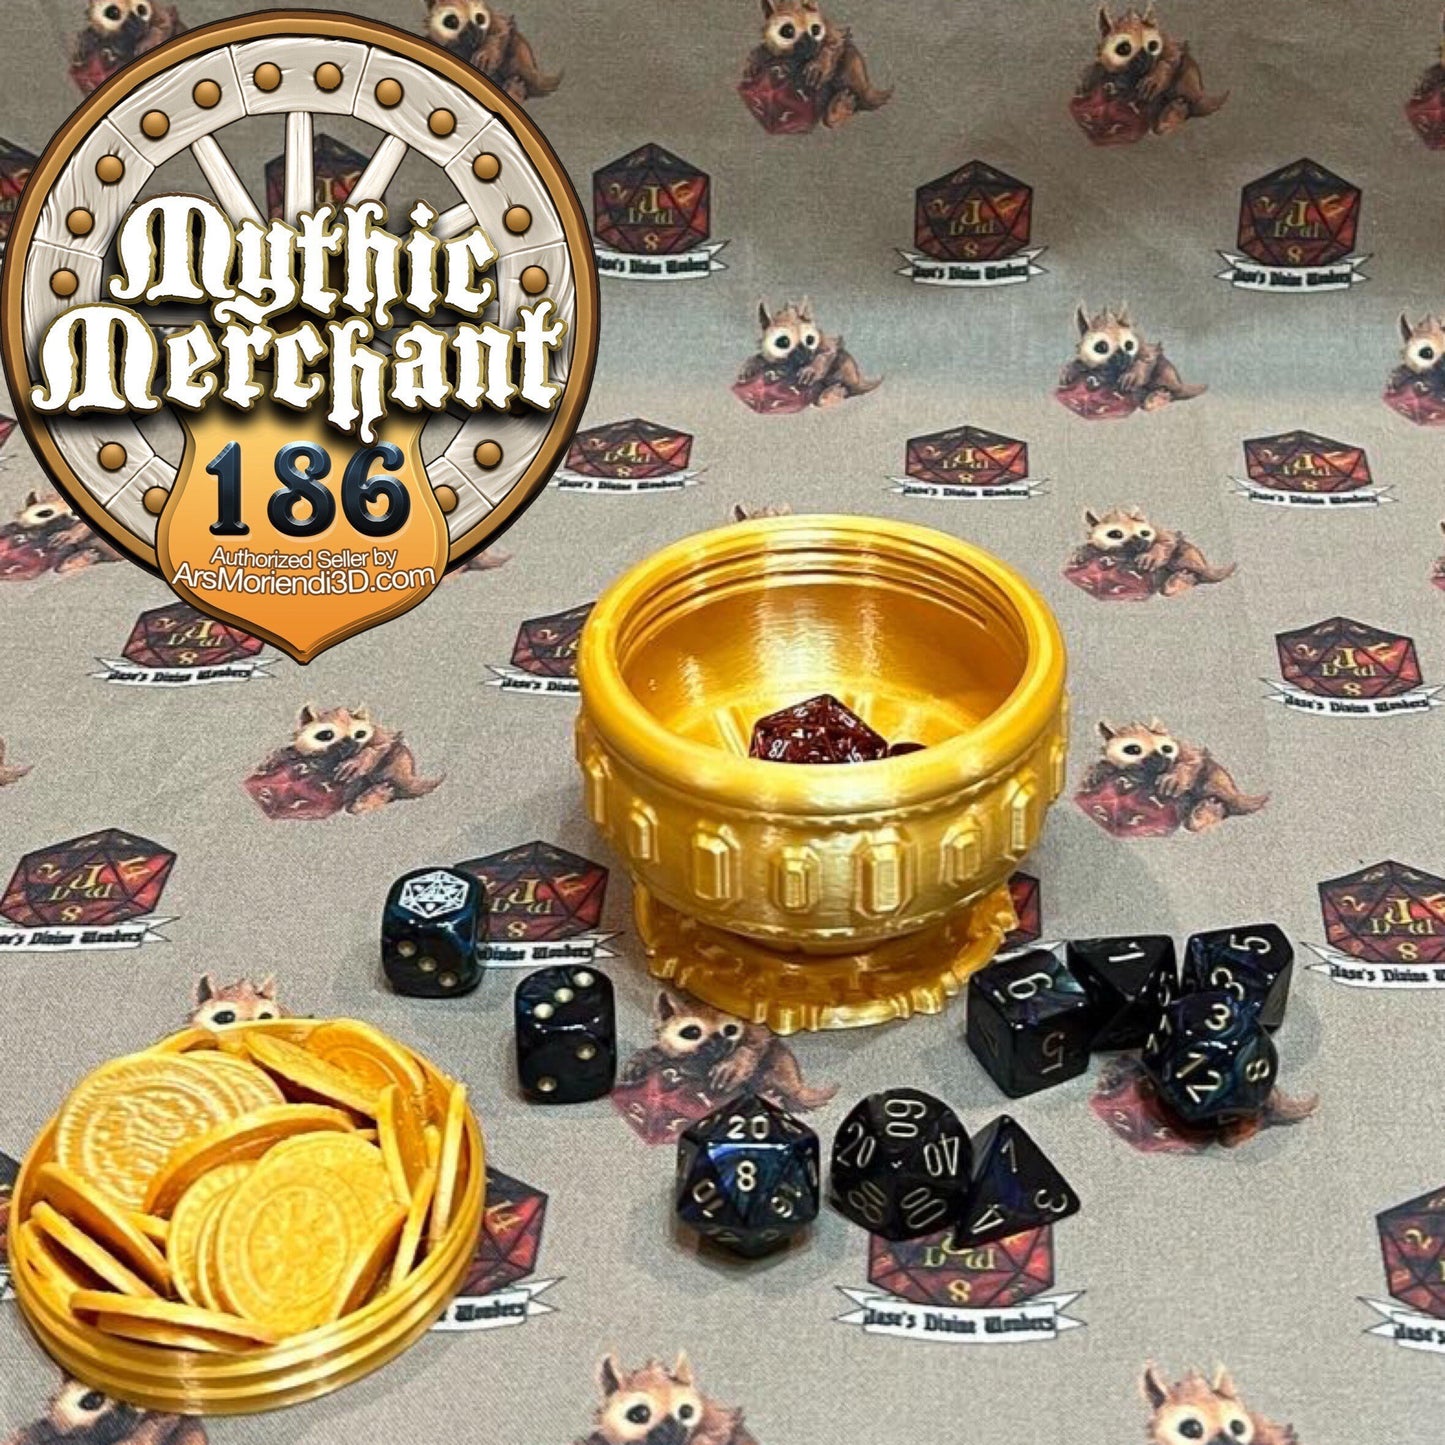 Treasure Dice Case from Ars Moriendi 3D - Dungeons and Dragons, Pathfinder, TTRPG, Dice Cup/Roller